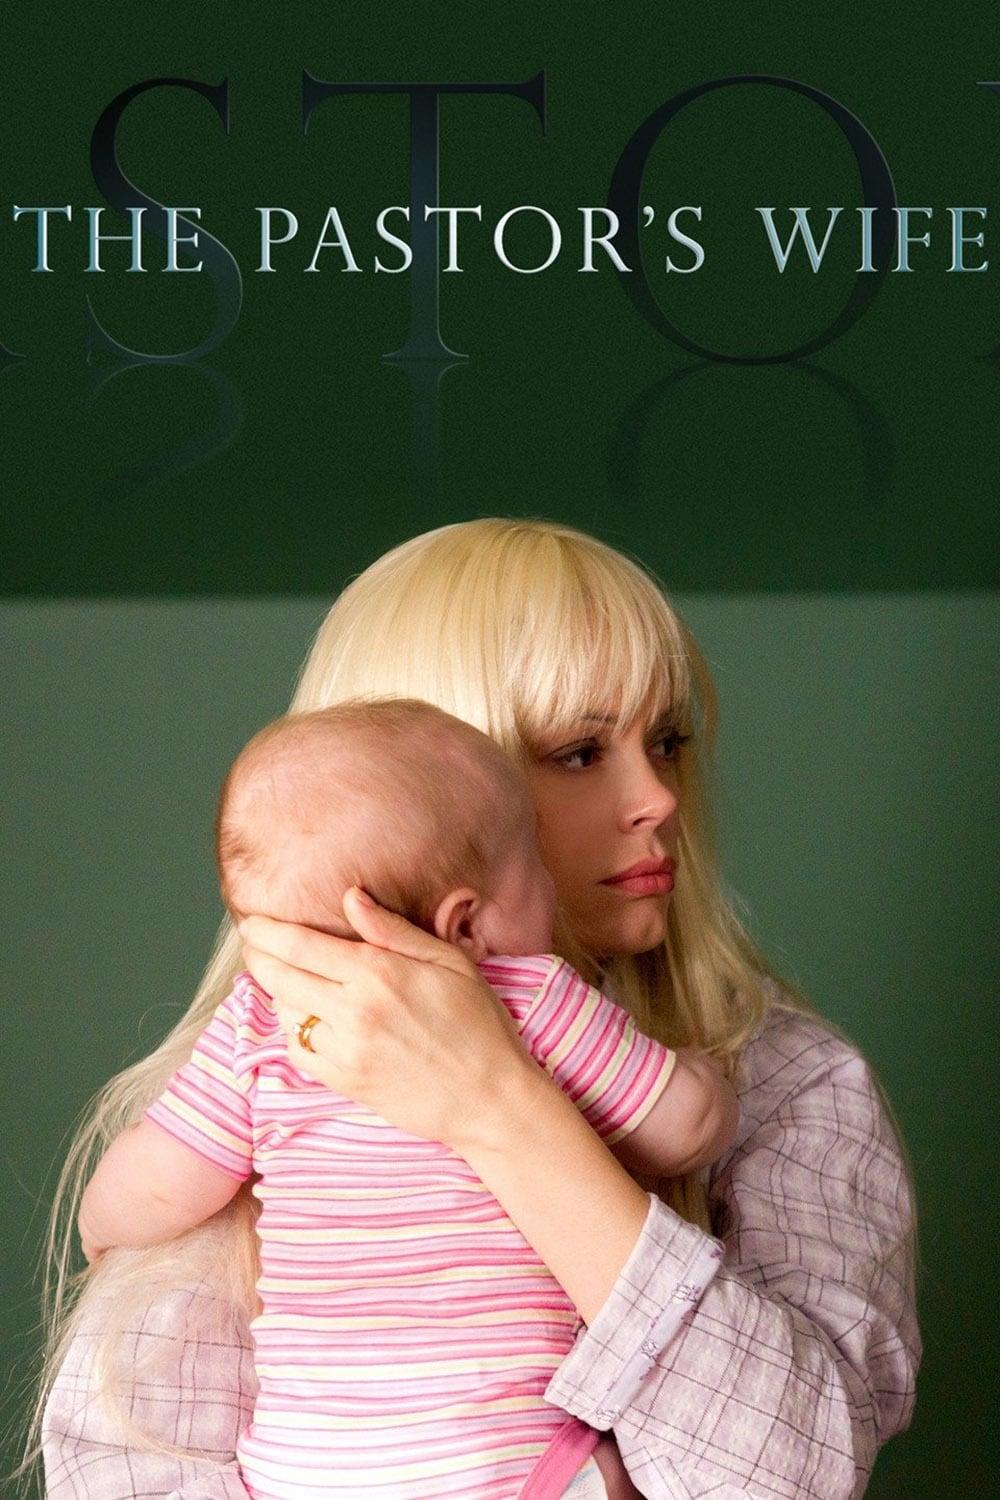 The Pastor's Wife poster